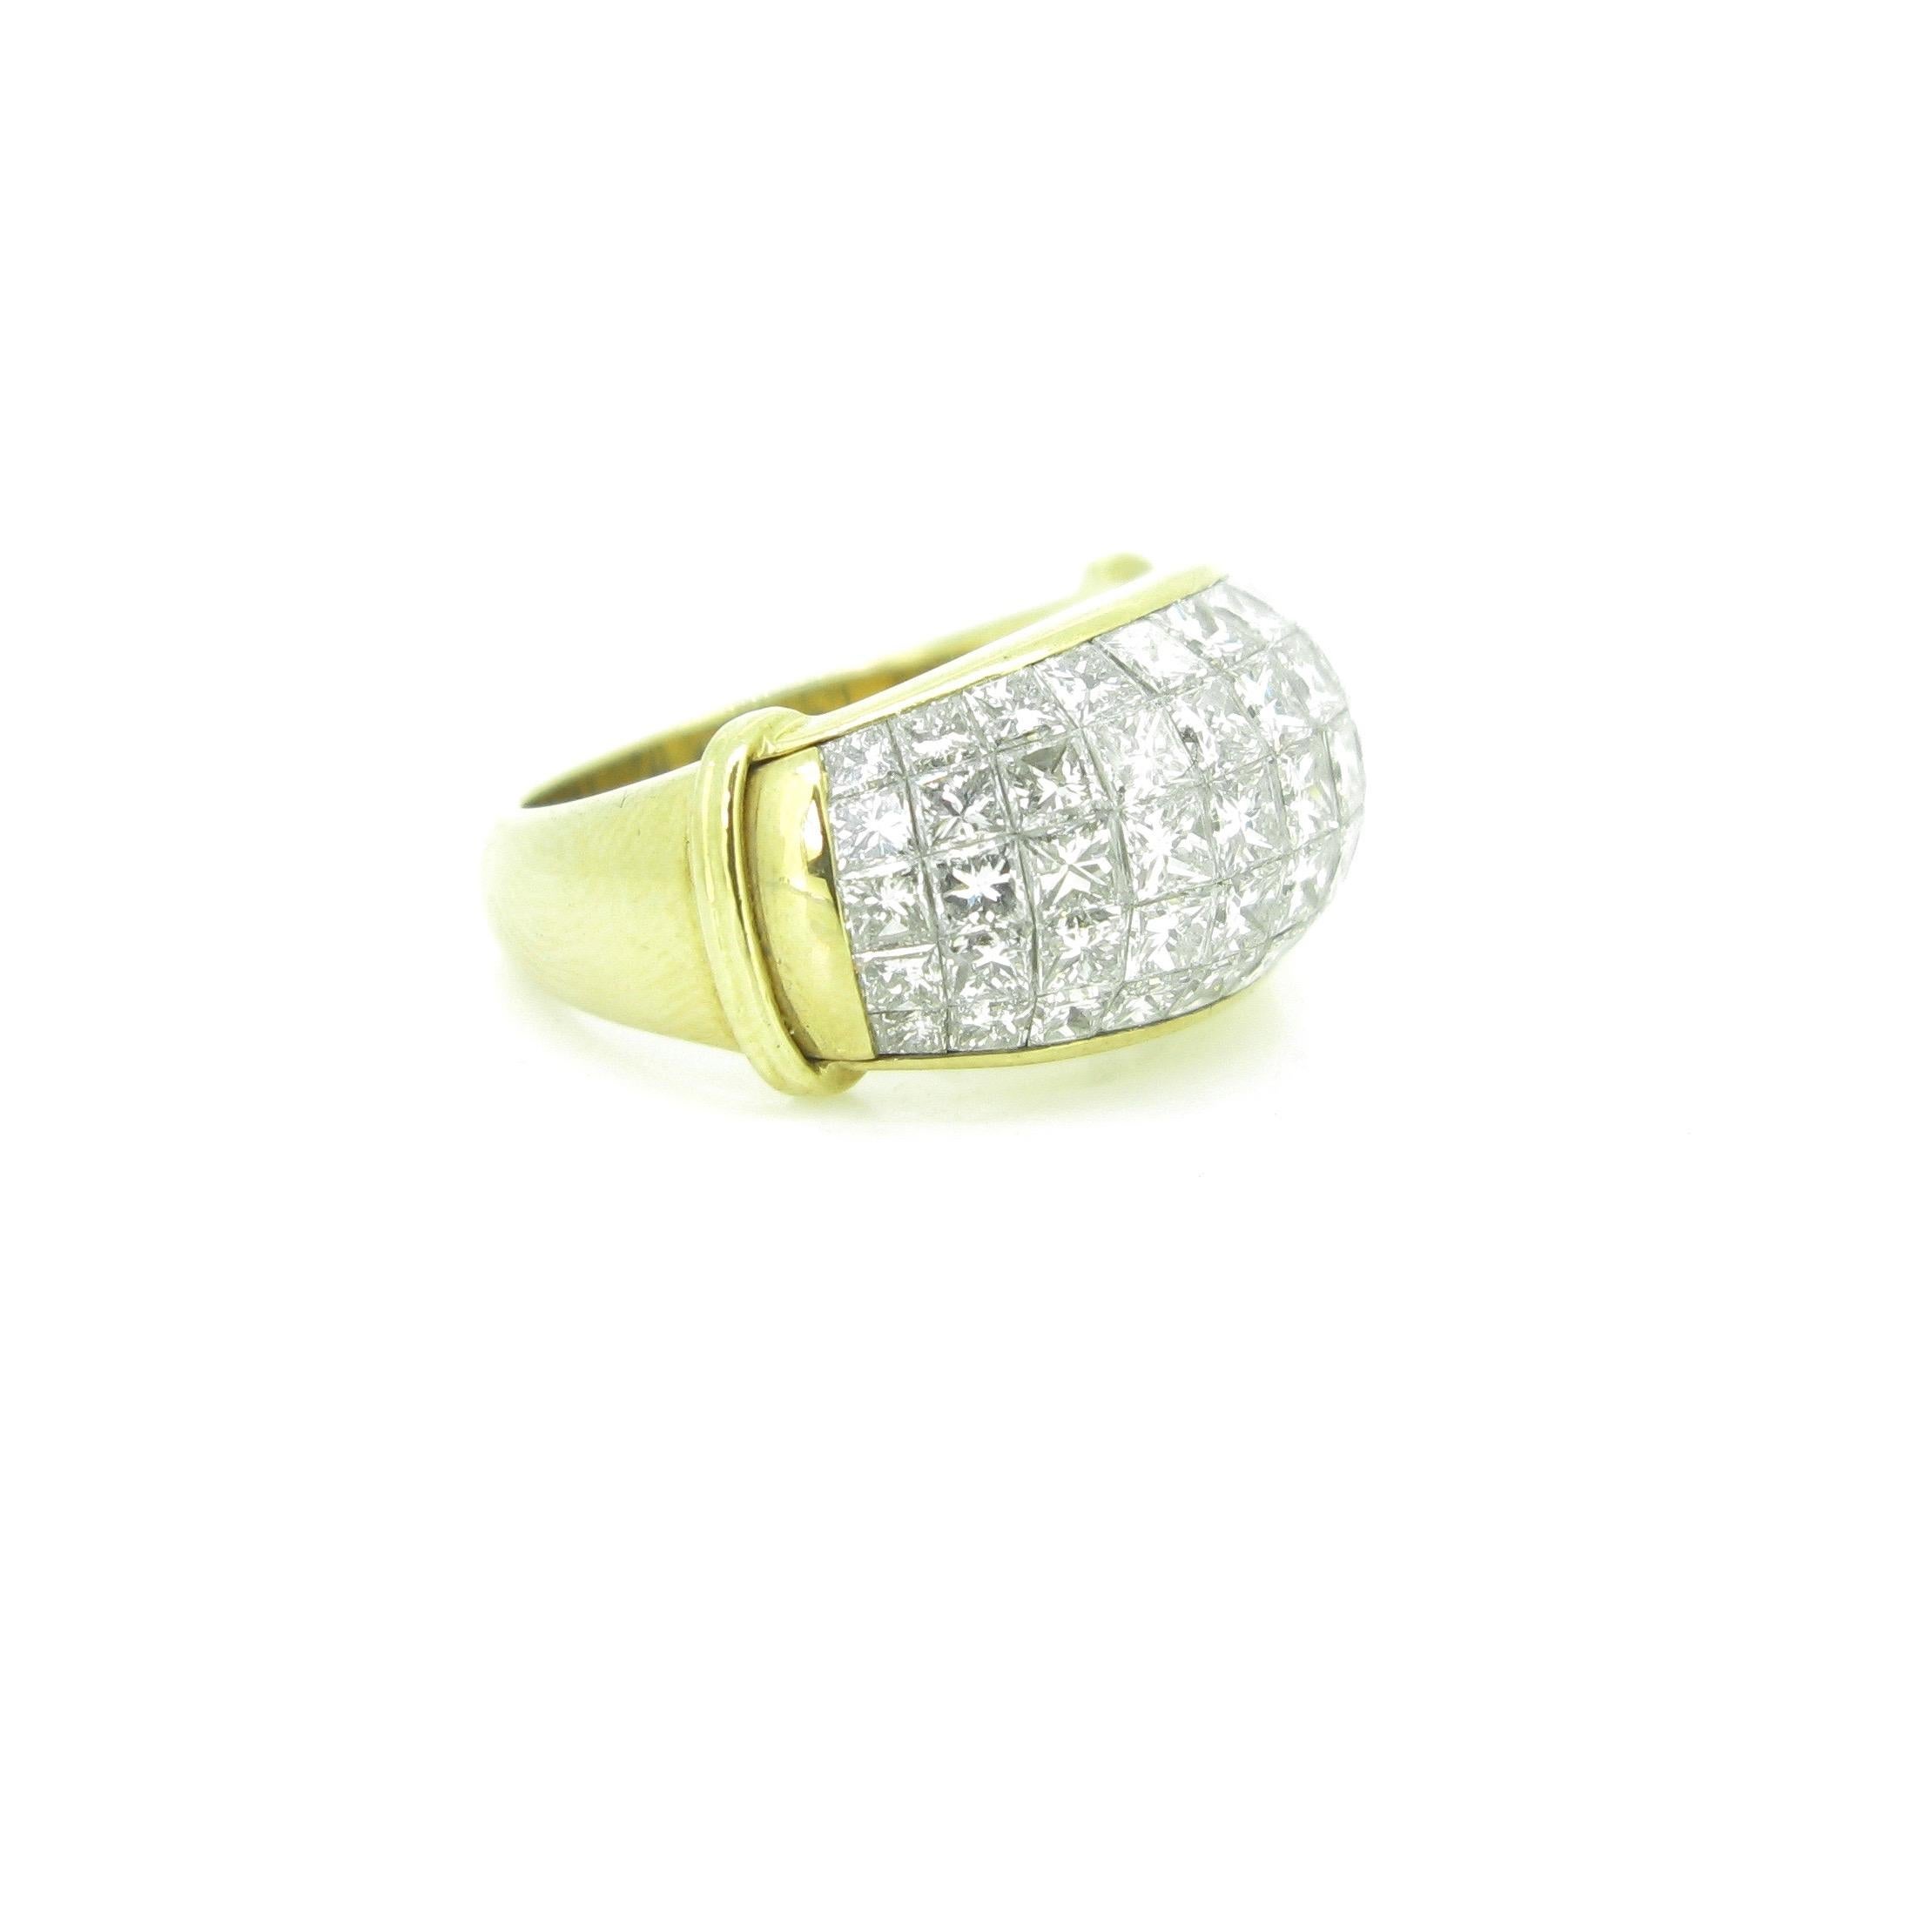 Modern Princess Cut Diamonds Serti Mysterieux Yellow Gold Pave Band Dome Cocktail Ring